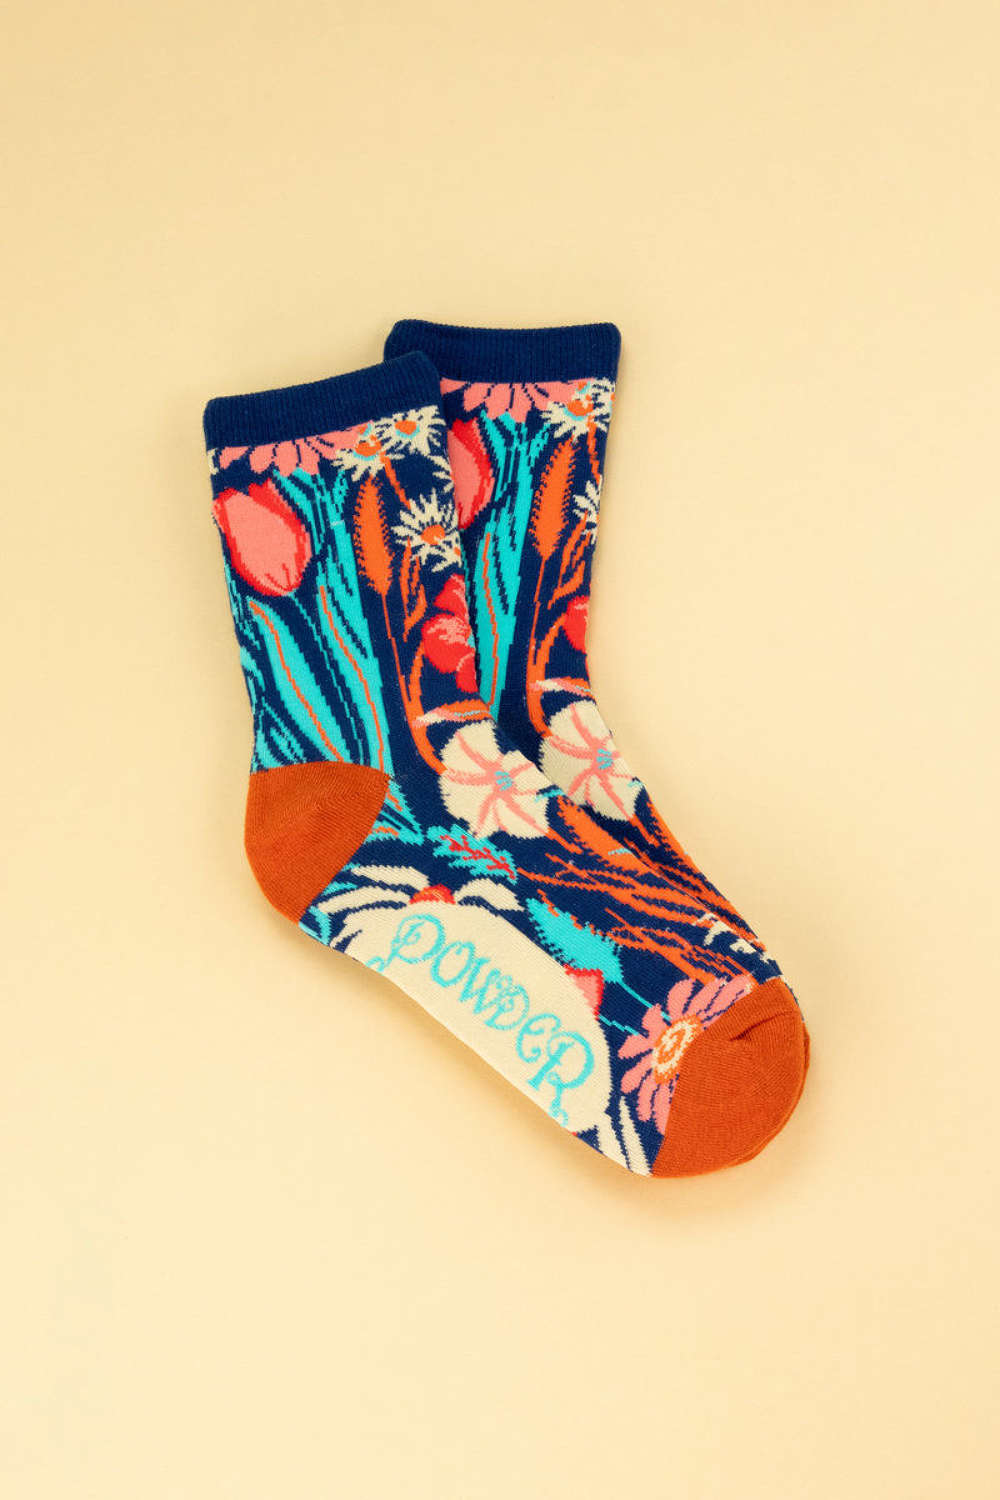 Powder - Country garden ankle socks - navy - one size